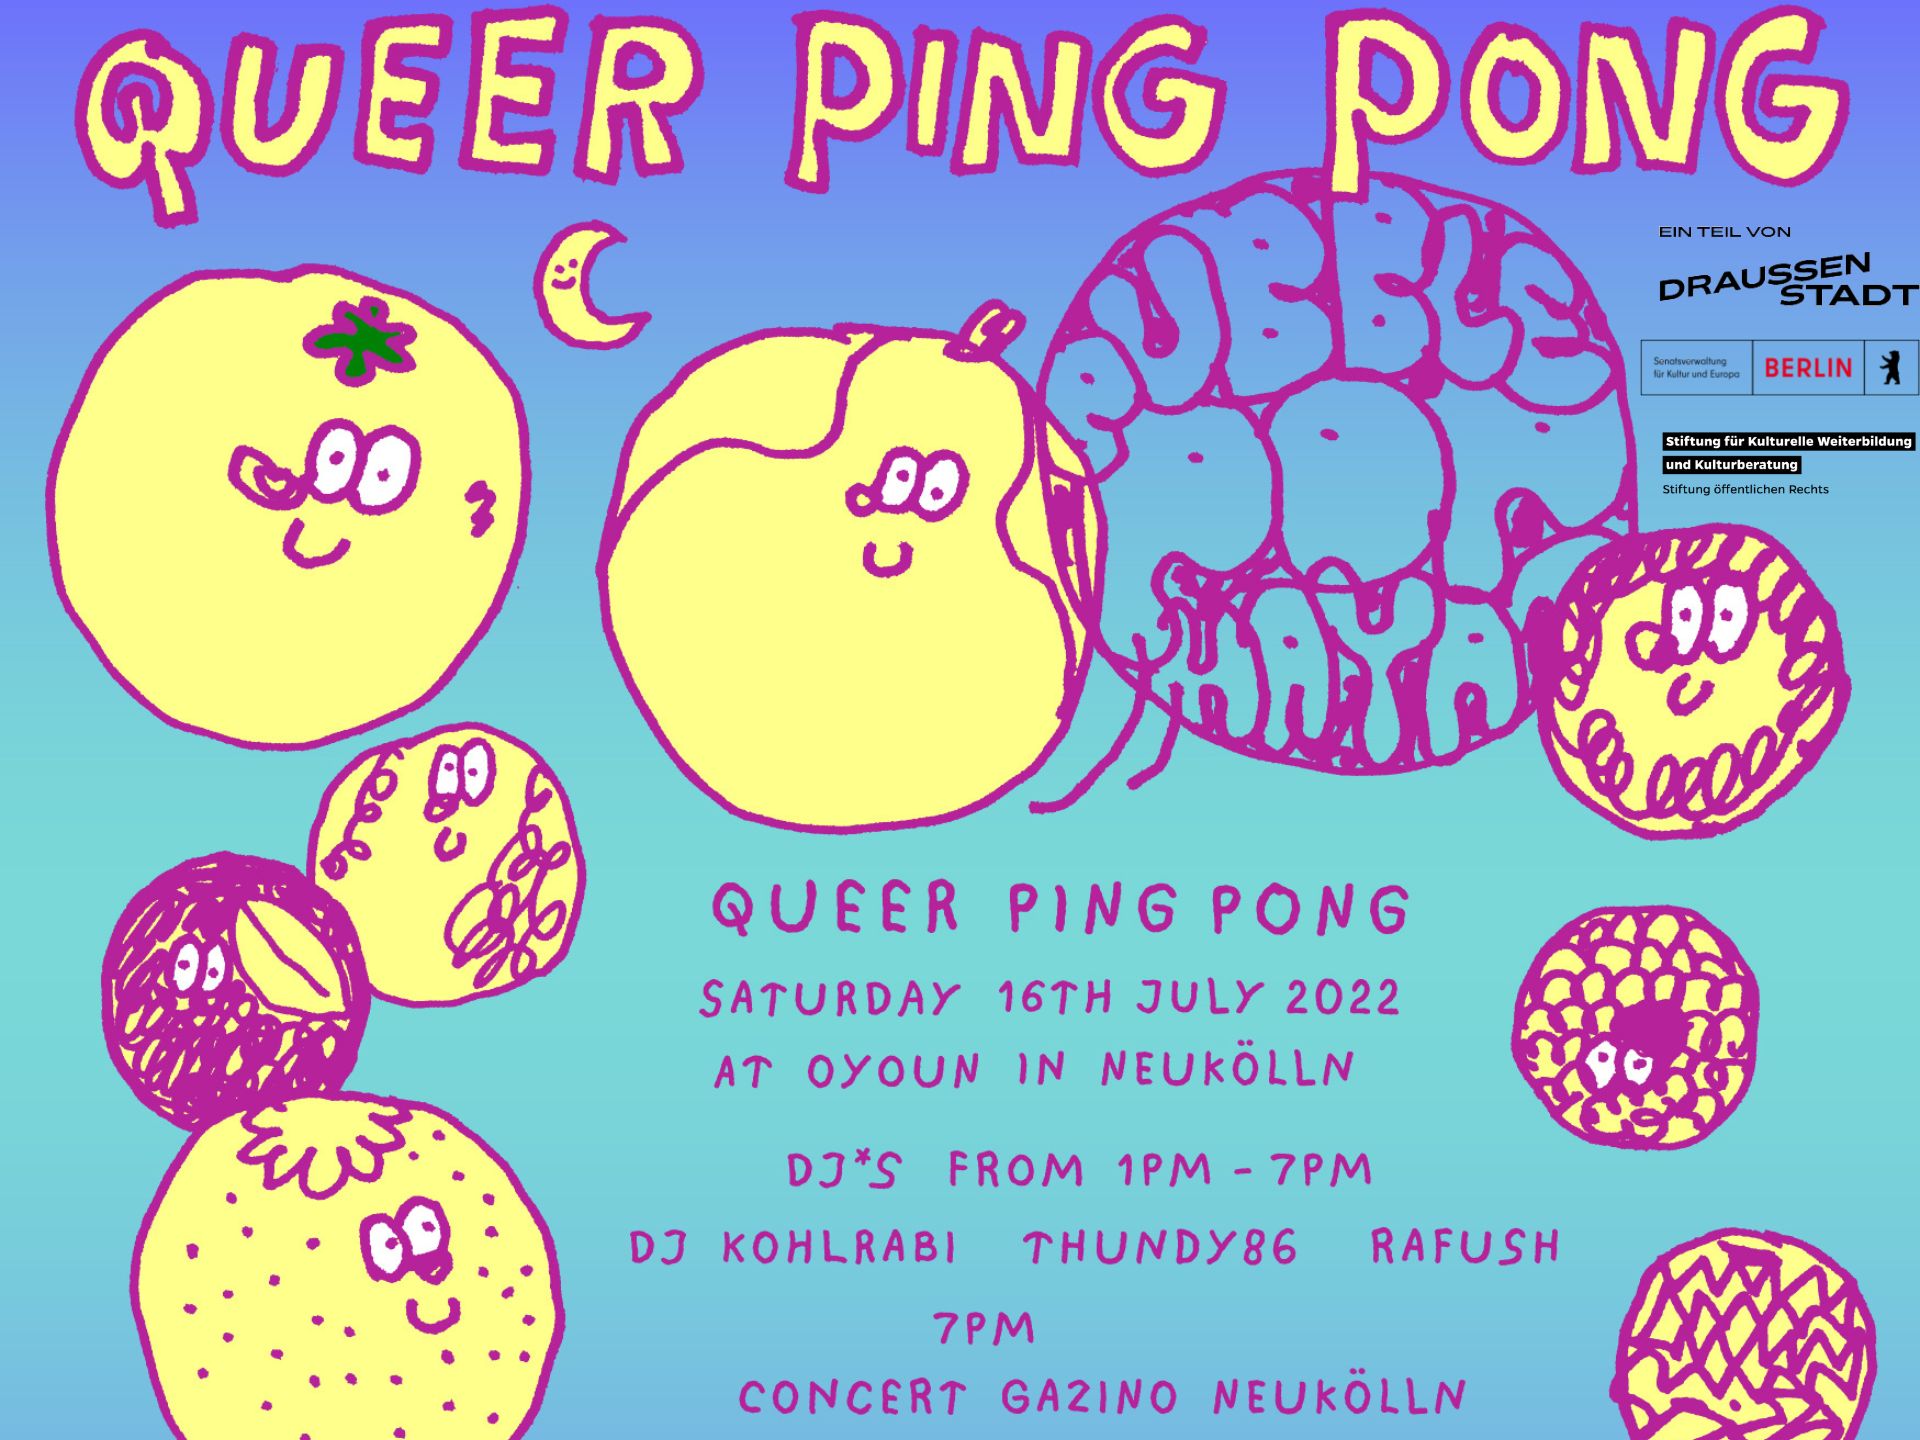 Ping-pong queer